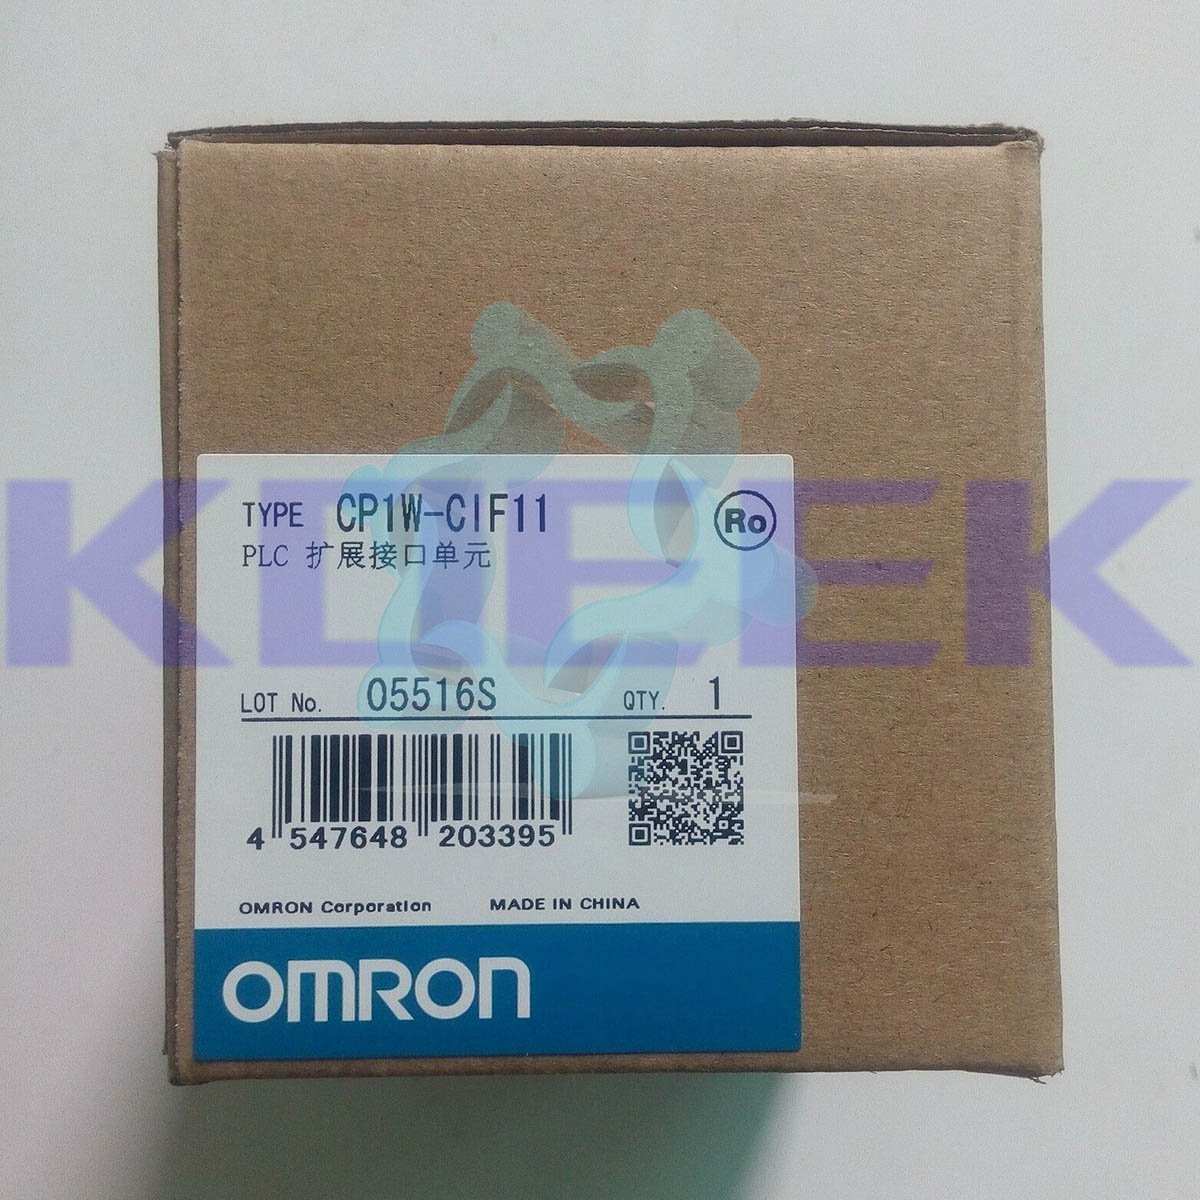 CP1WCIF11 KOEED 101-200, 80%, import_2020_10_10_031751, Omron, Other